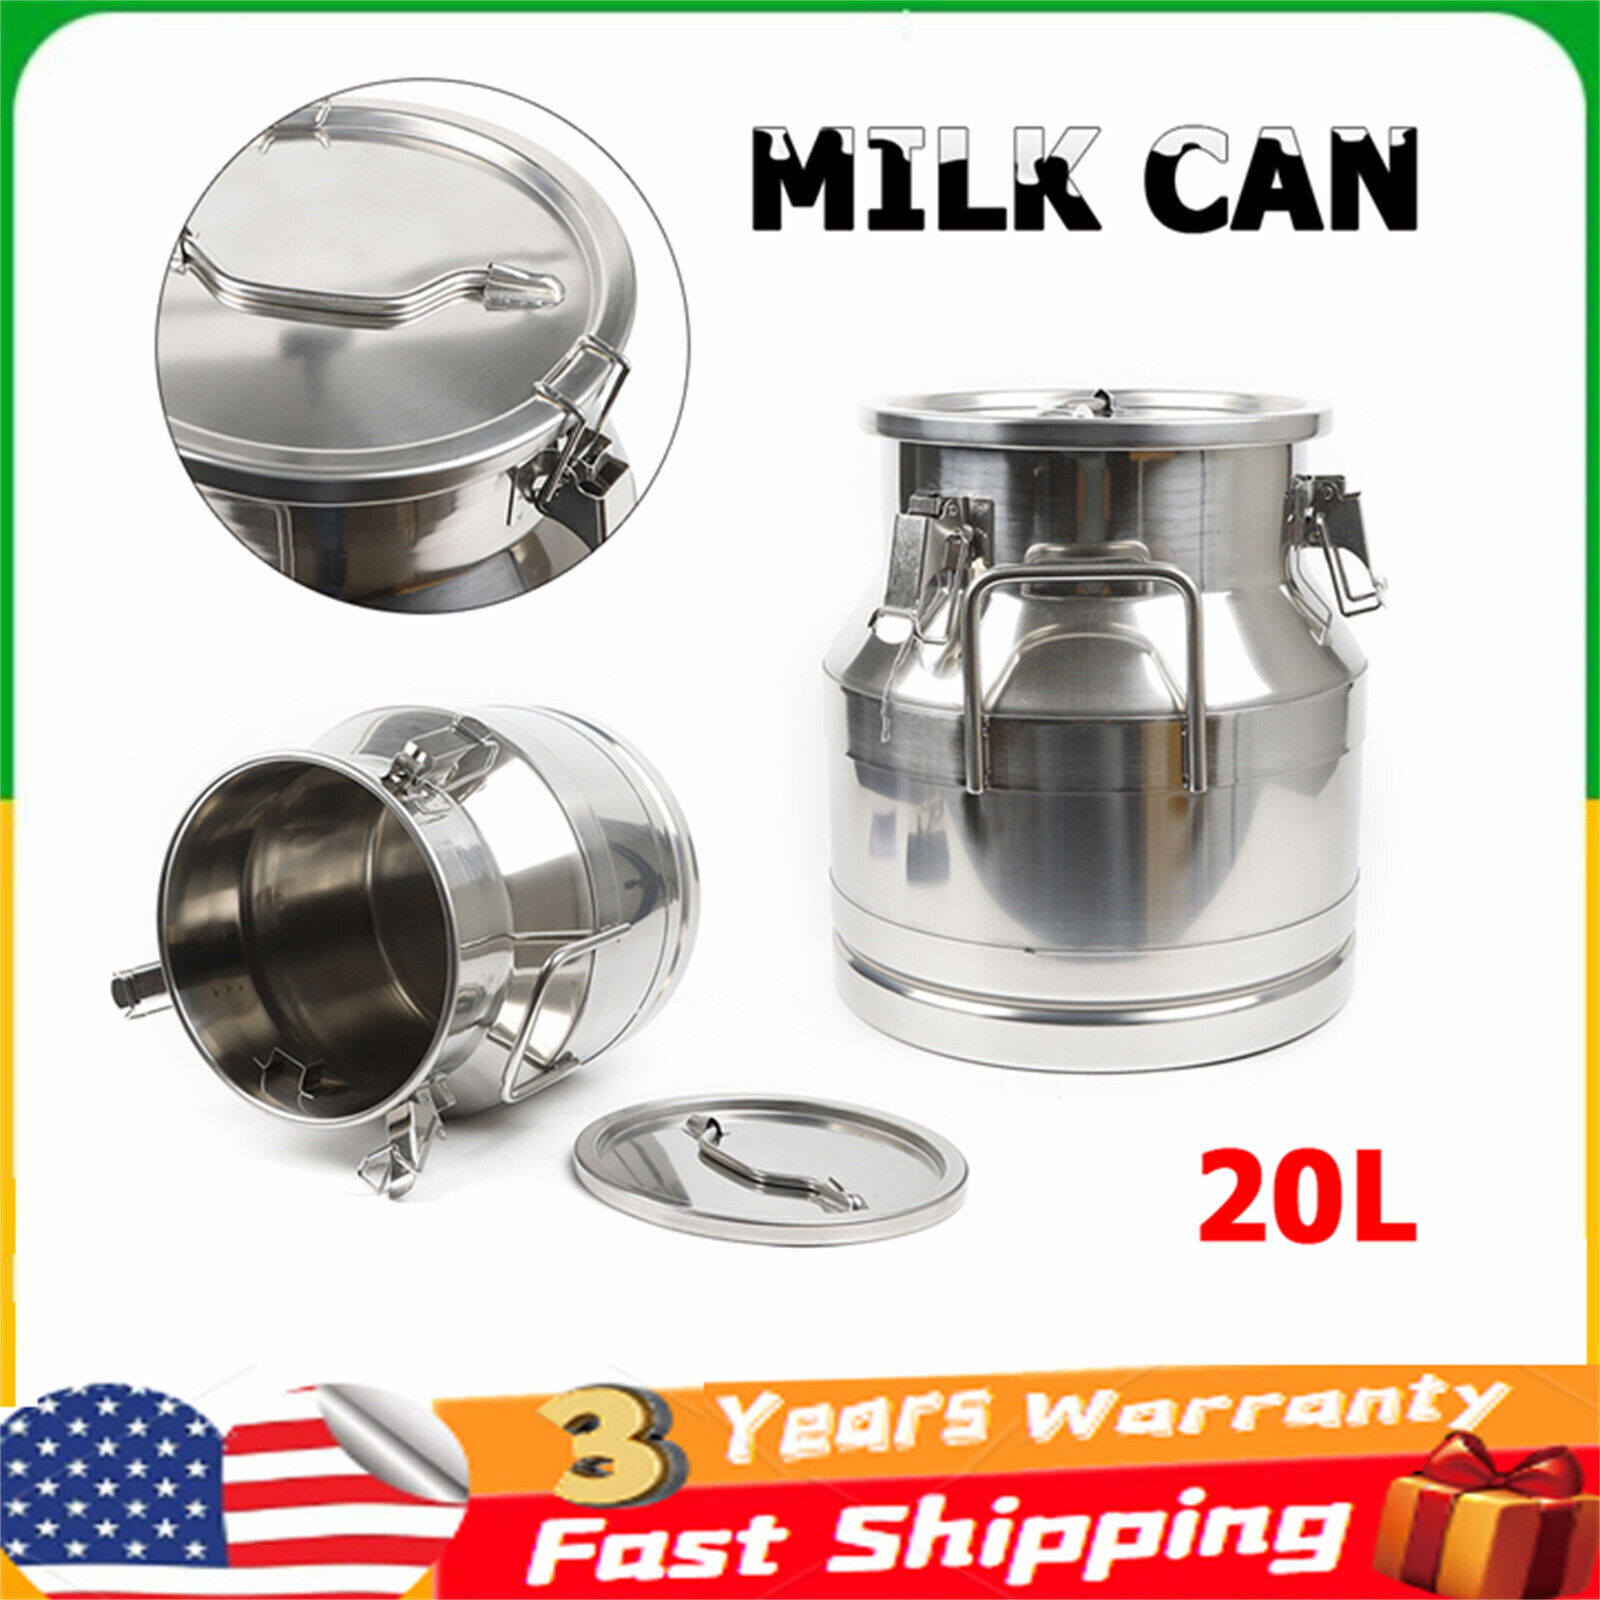 20 Liters High Quality Stainless Steel Milk Can Silicone Seal Mirror-polish New